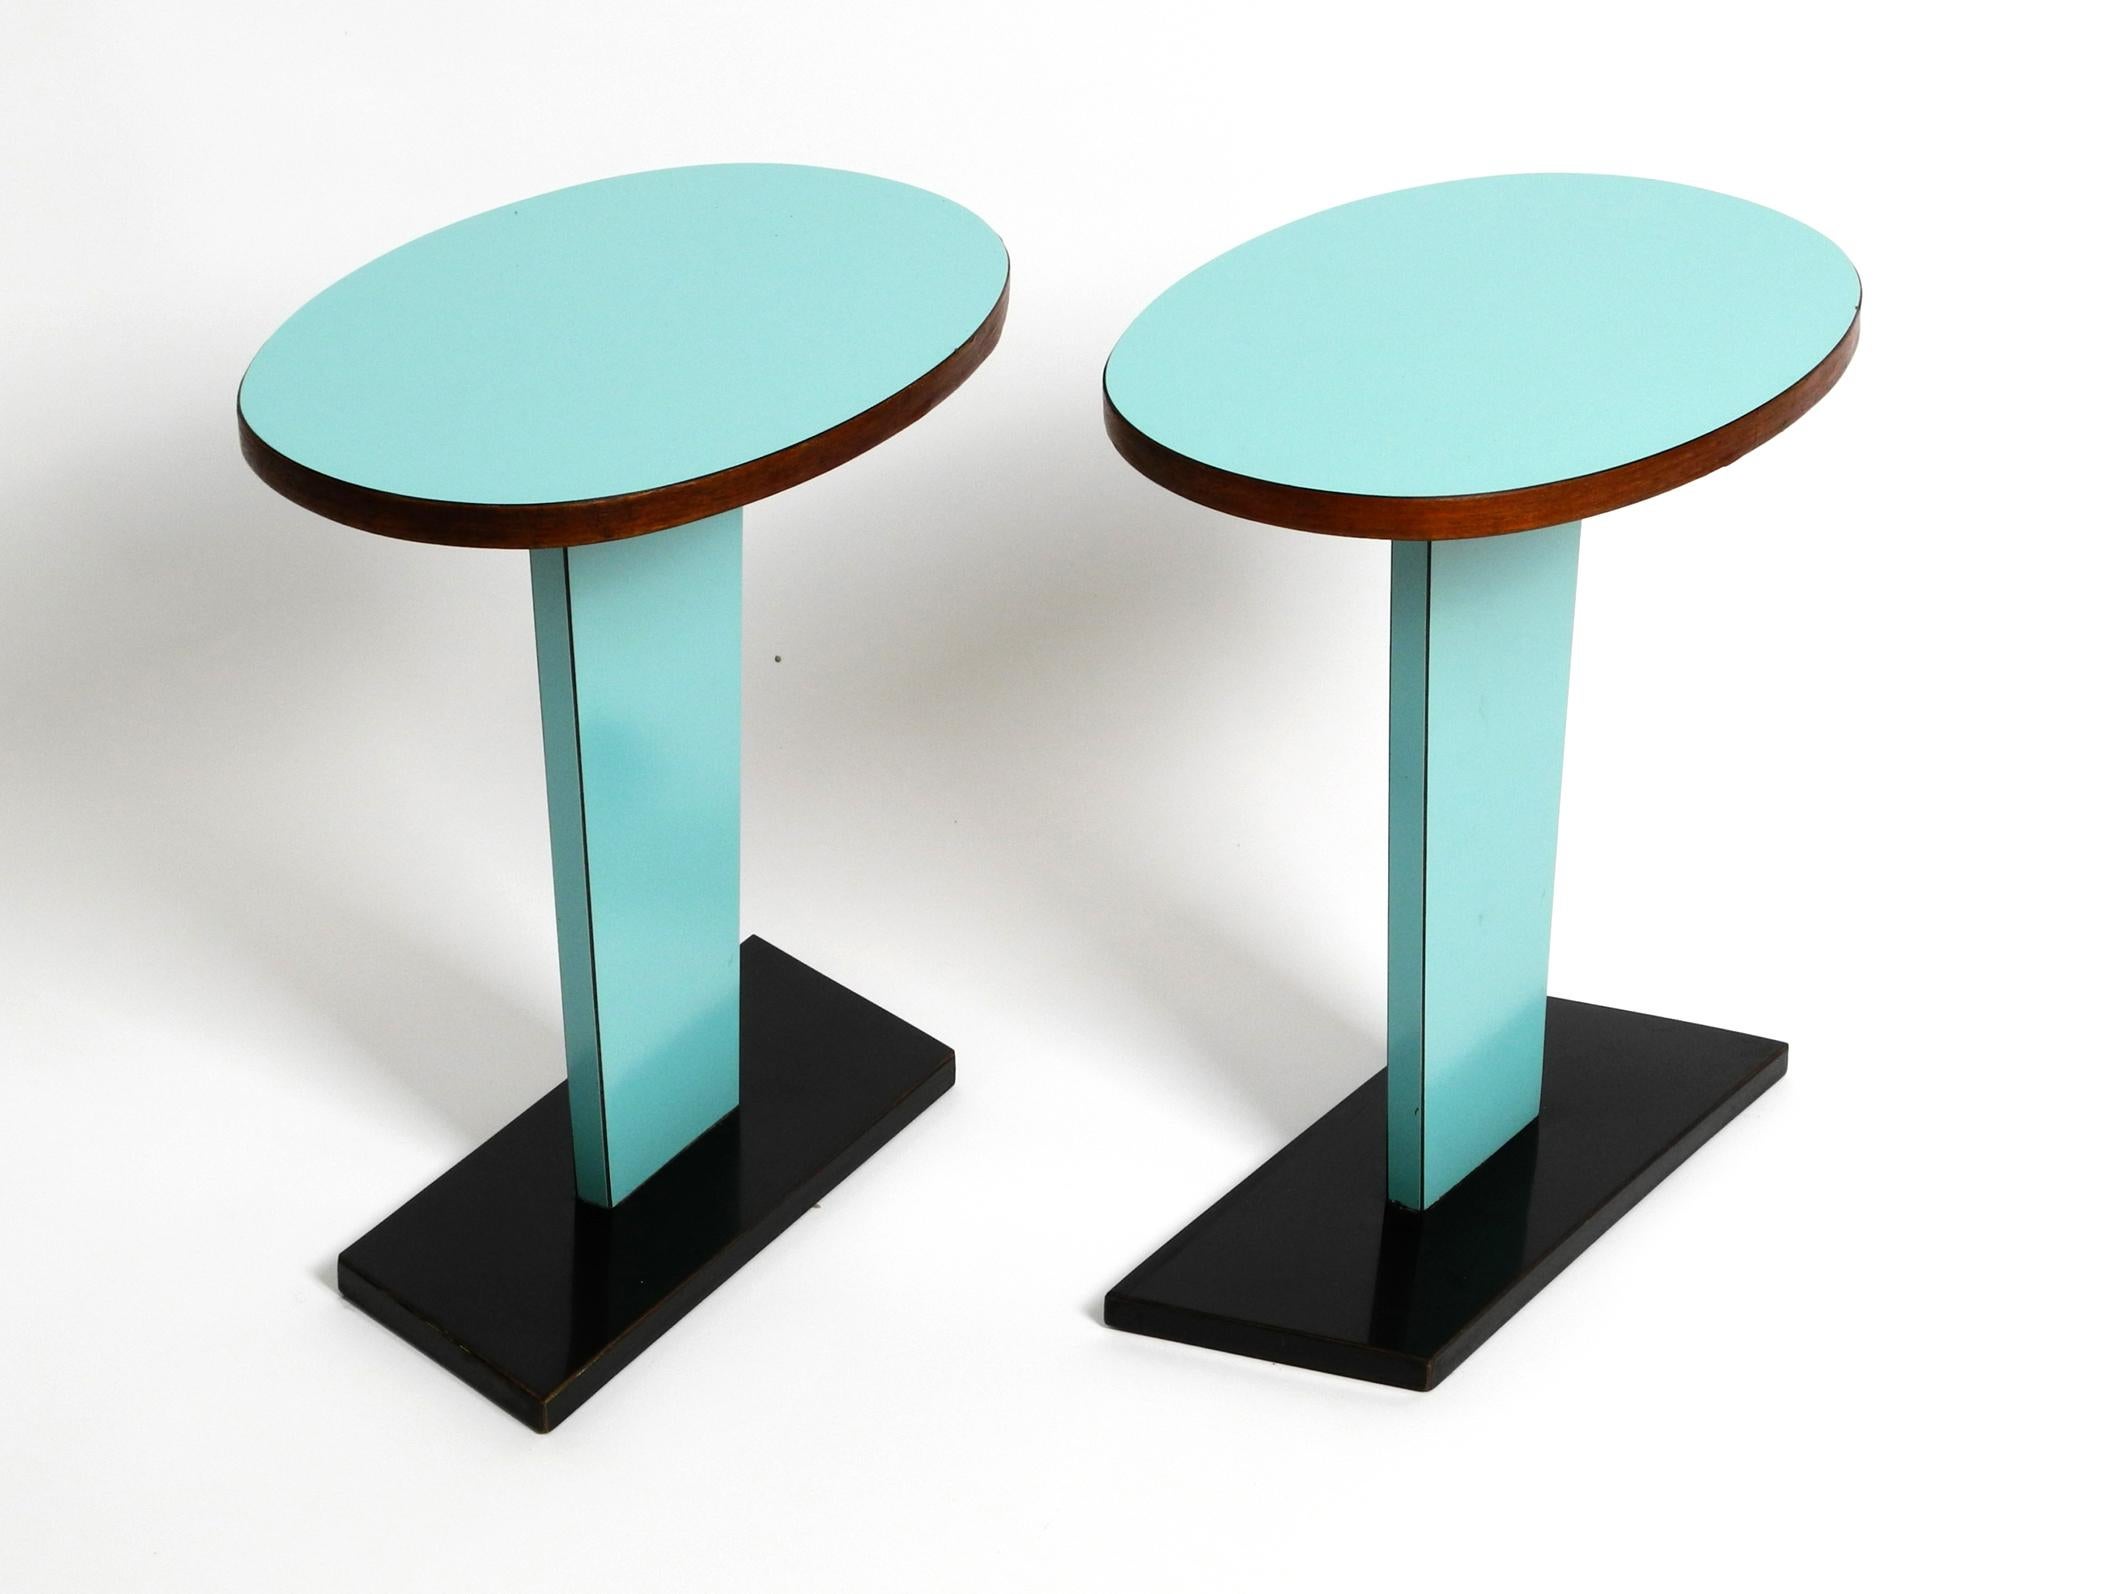 Pair of rare Italian Mid Century side tables with formica surface.
Solid wood tabletop with a turquoise Resopal surface, the edges are covered with teak veneer.
Neck and foot are with black formica.
Very nice 1950s minimalist design.
In good